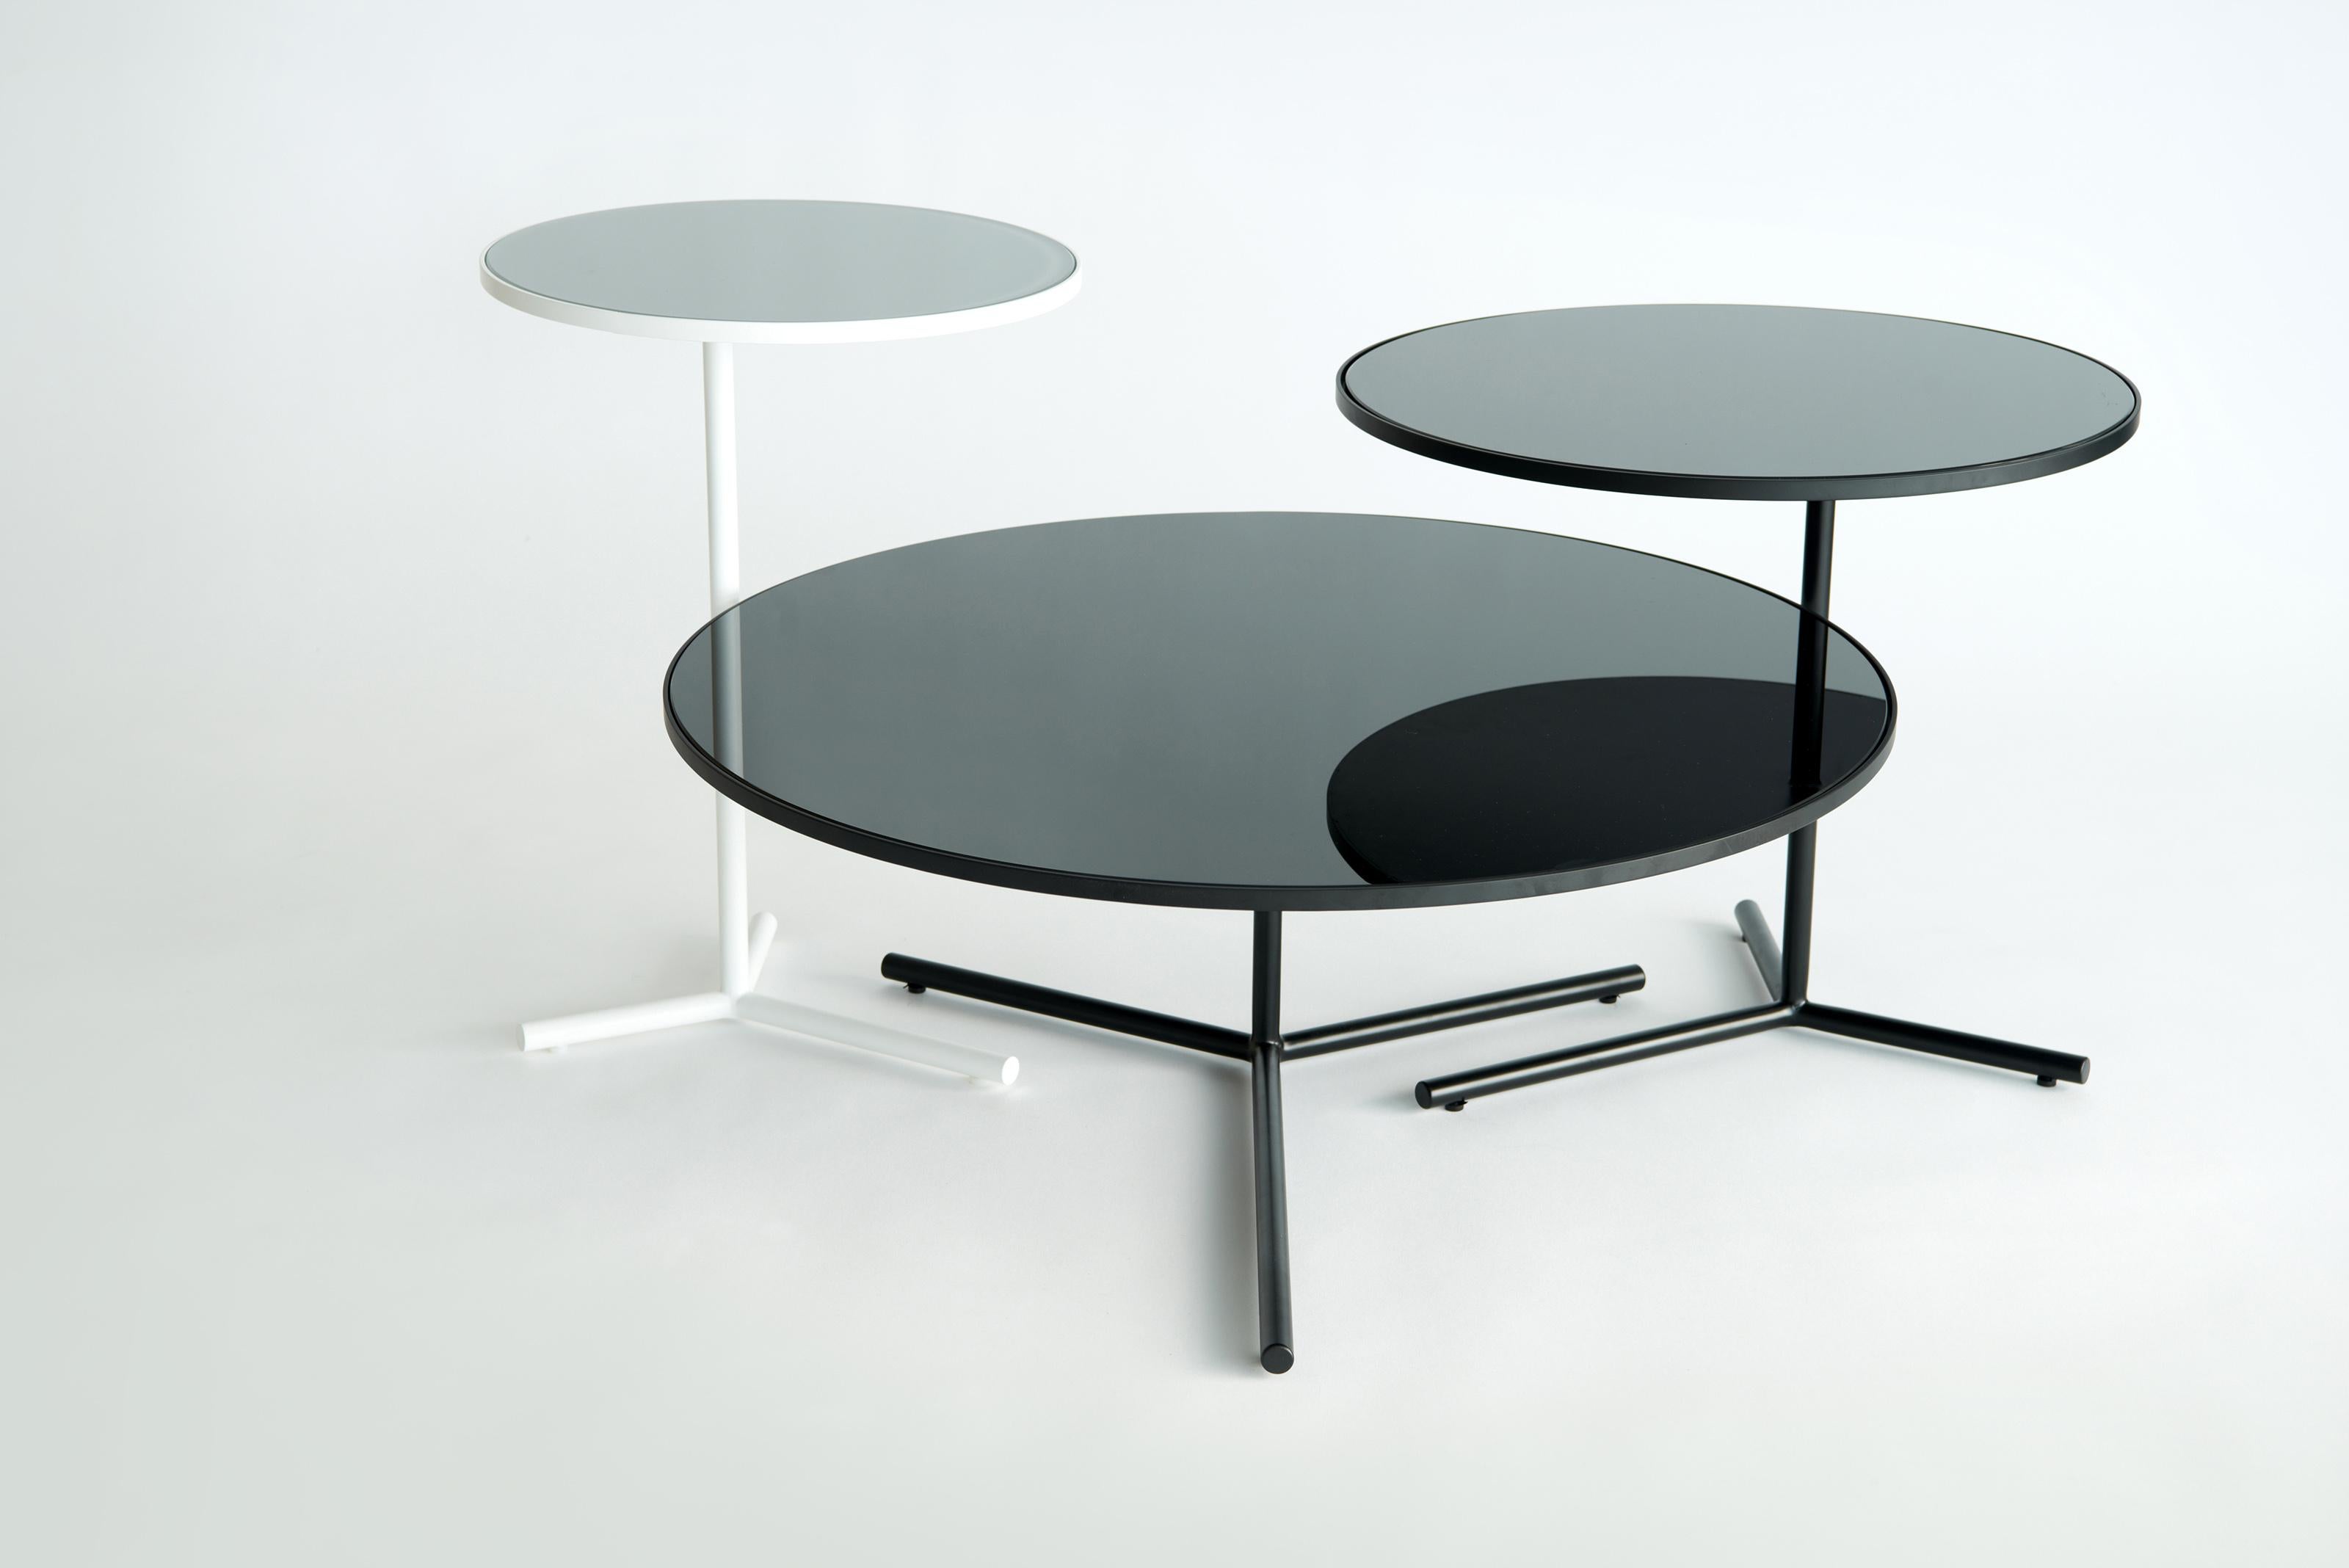 Set Of 3 Downtown Tables by Phase Design
Dimensions: Large: Ø 76,2 x H 30,5 cm. 
Medium: Ø 50,8 x H 45,7 cm. 
Small: Ø 38,1 x H 53,34 cm.
Materials: Spandrel glass and powder-coated steel.

Solid steel base available in flat or gloss black and white